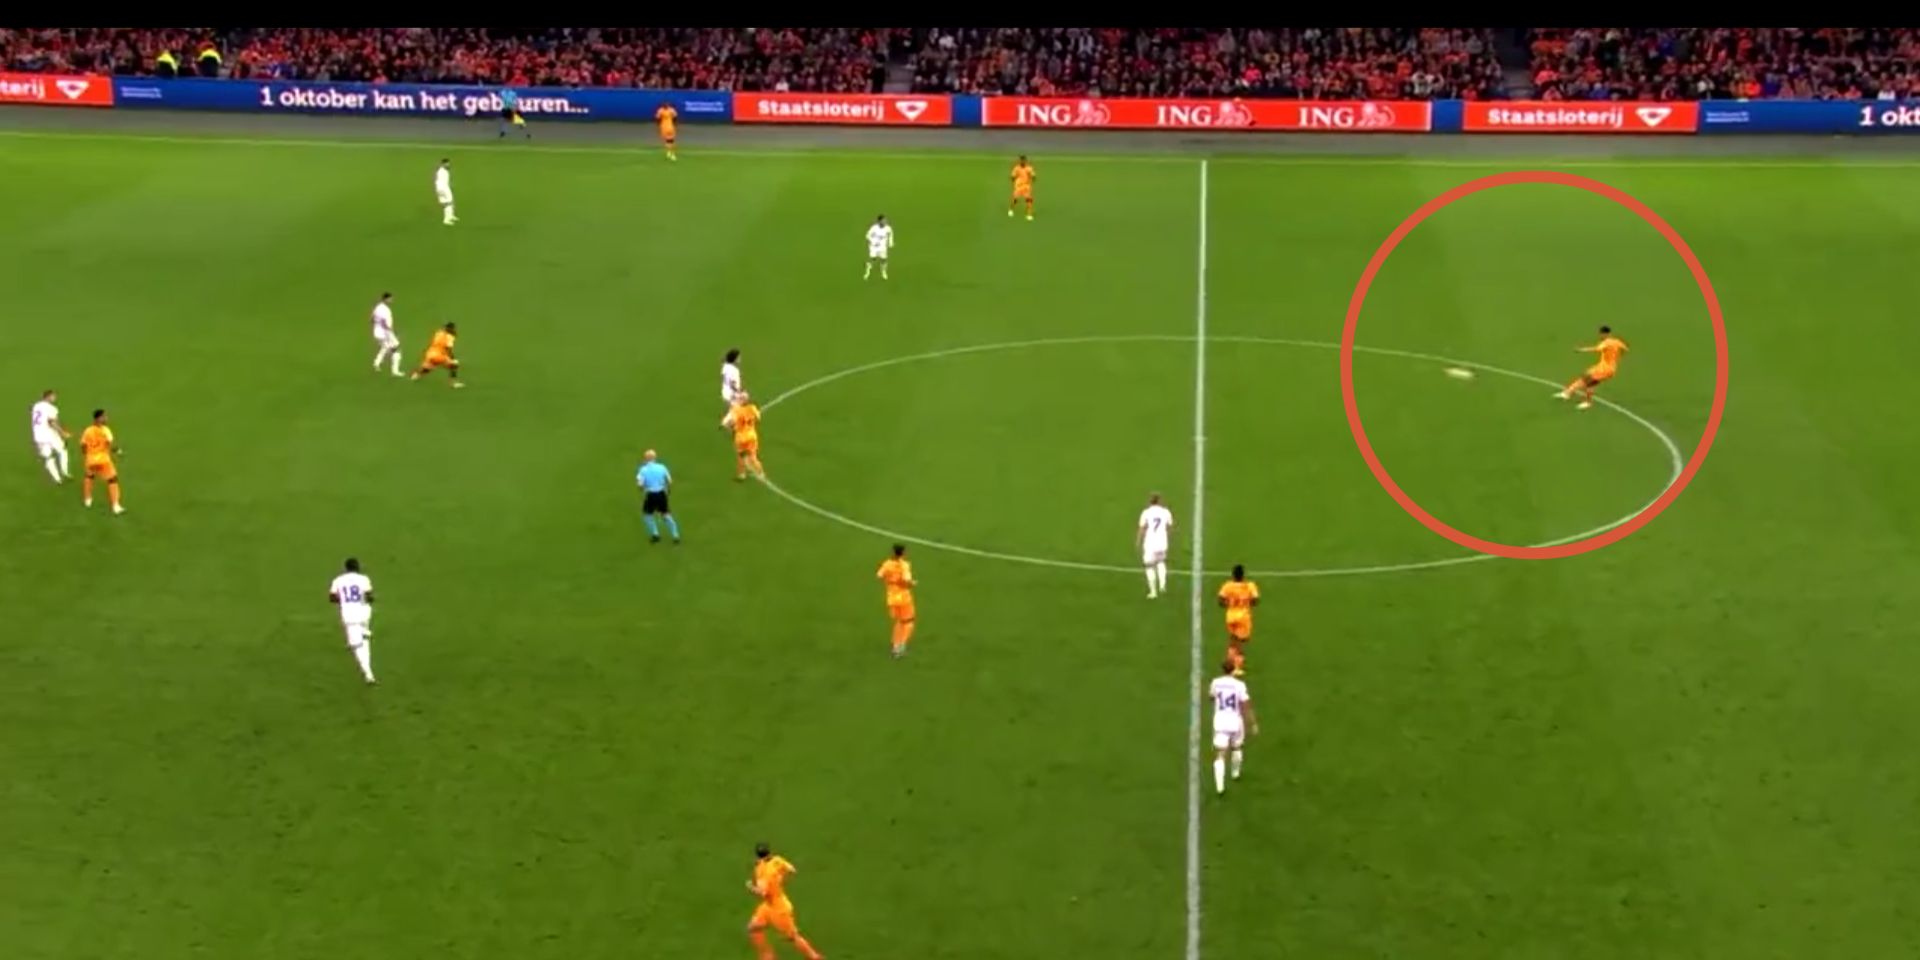 (Video) Virgil van Dijk plays insane pinpoint 90yd pass for Holland with unerring accuracy